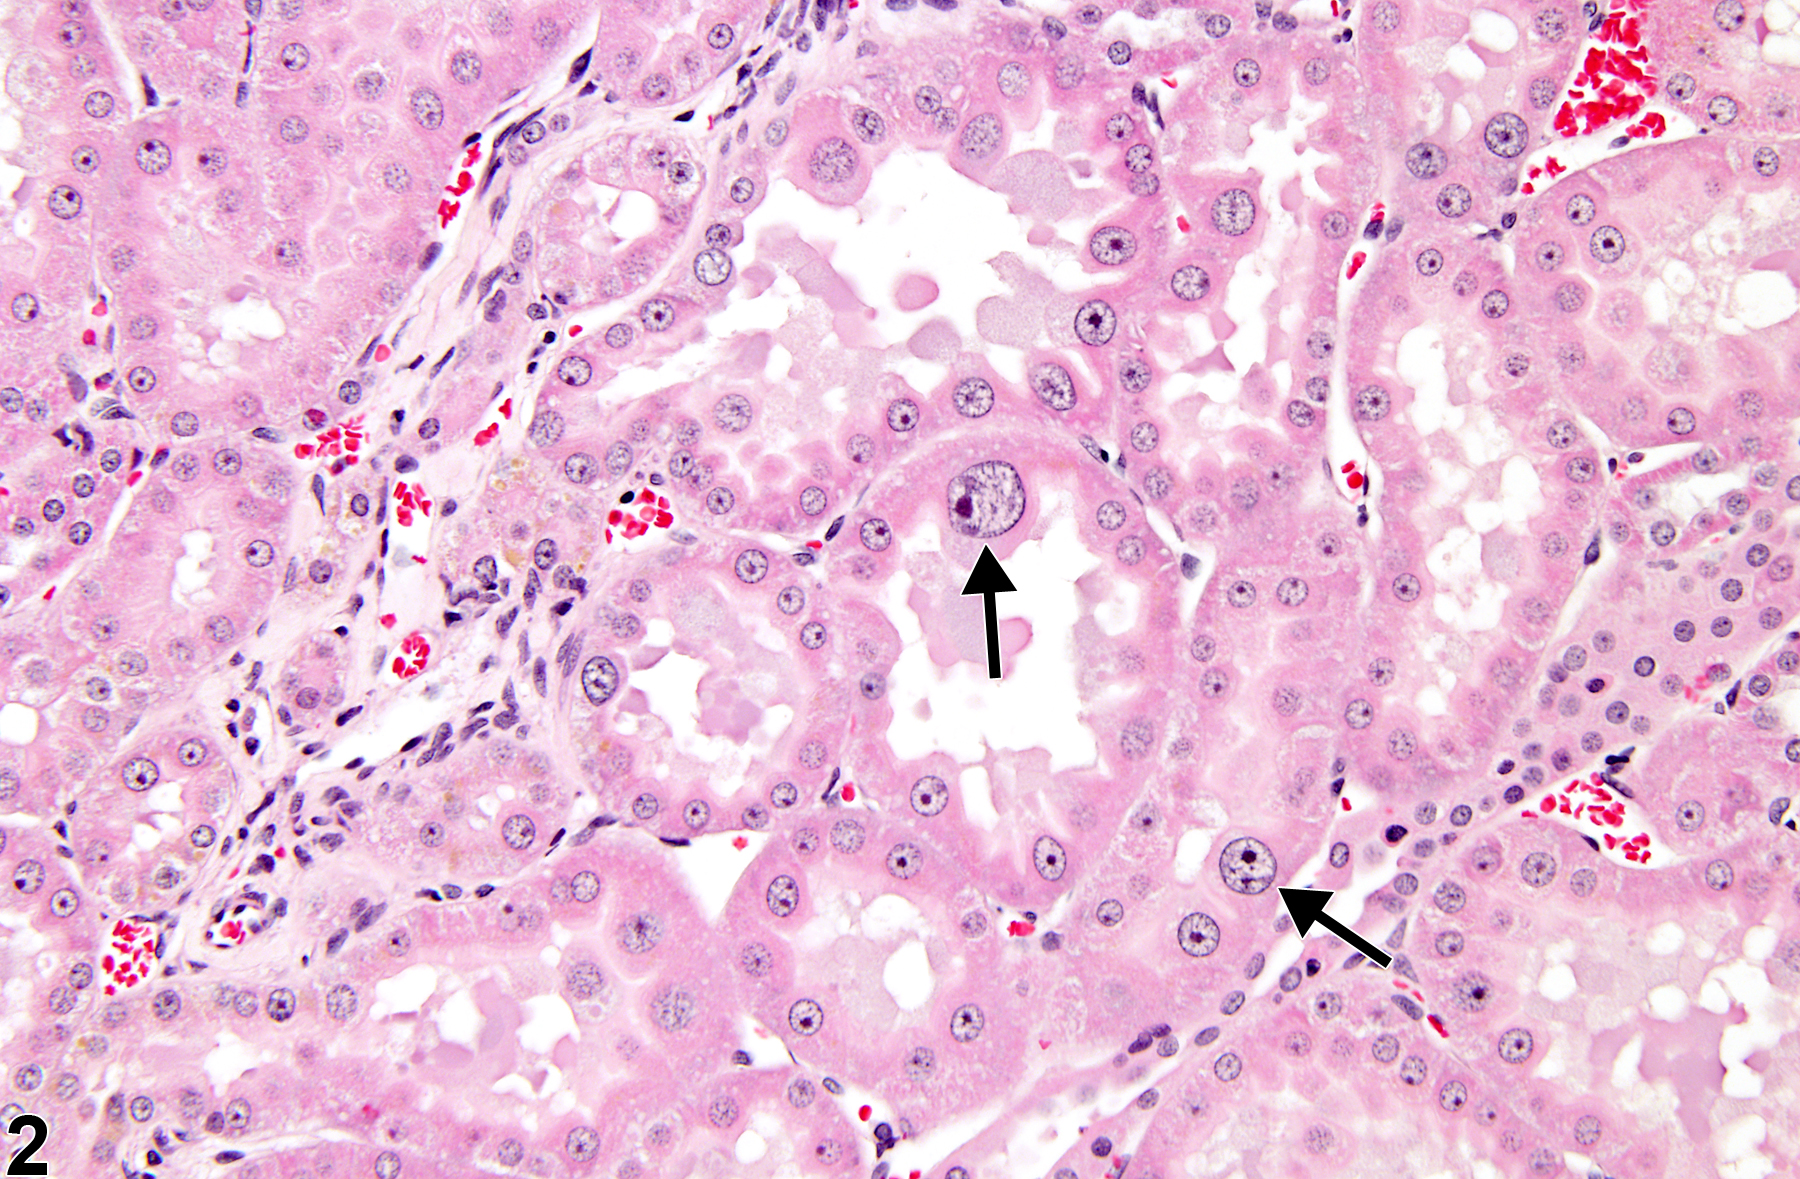 Image of karyomegaly in the kidney from a male F344/N rat in a subchronic study